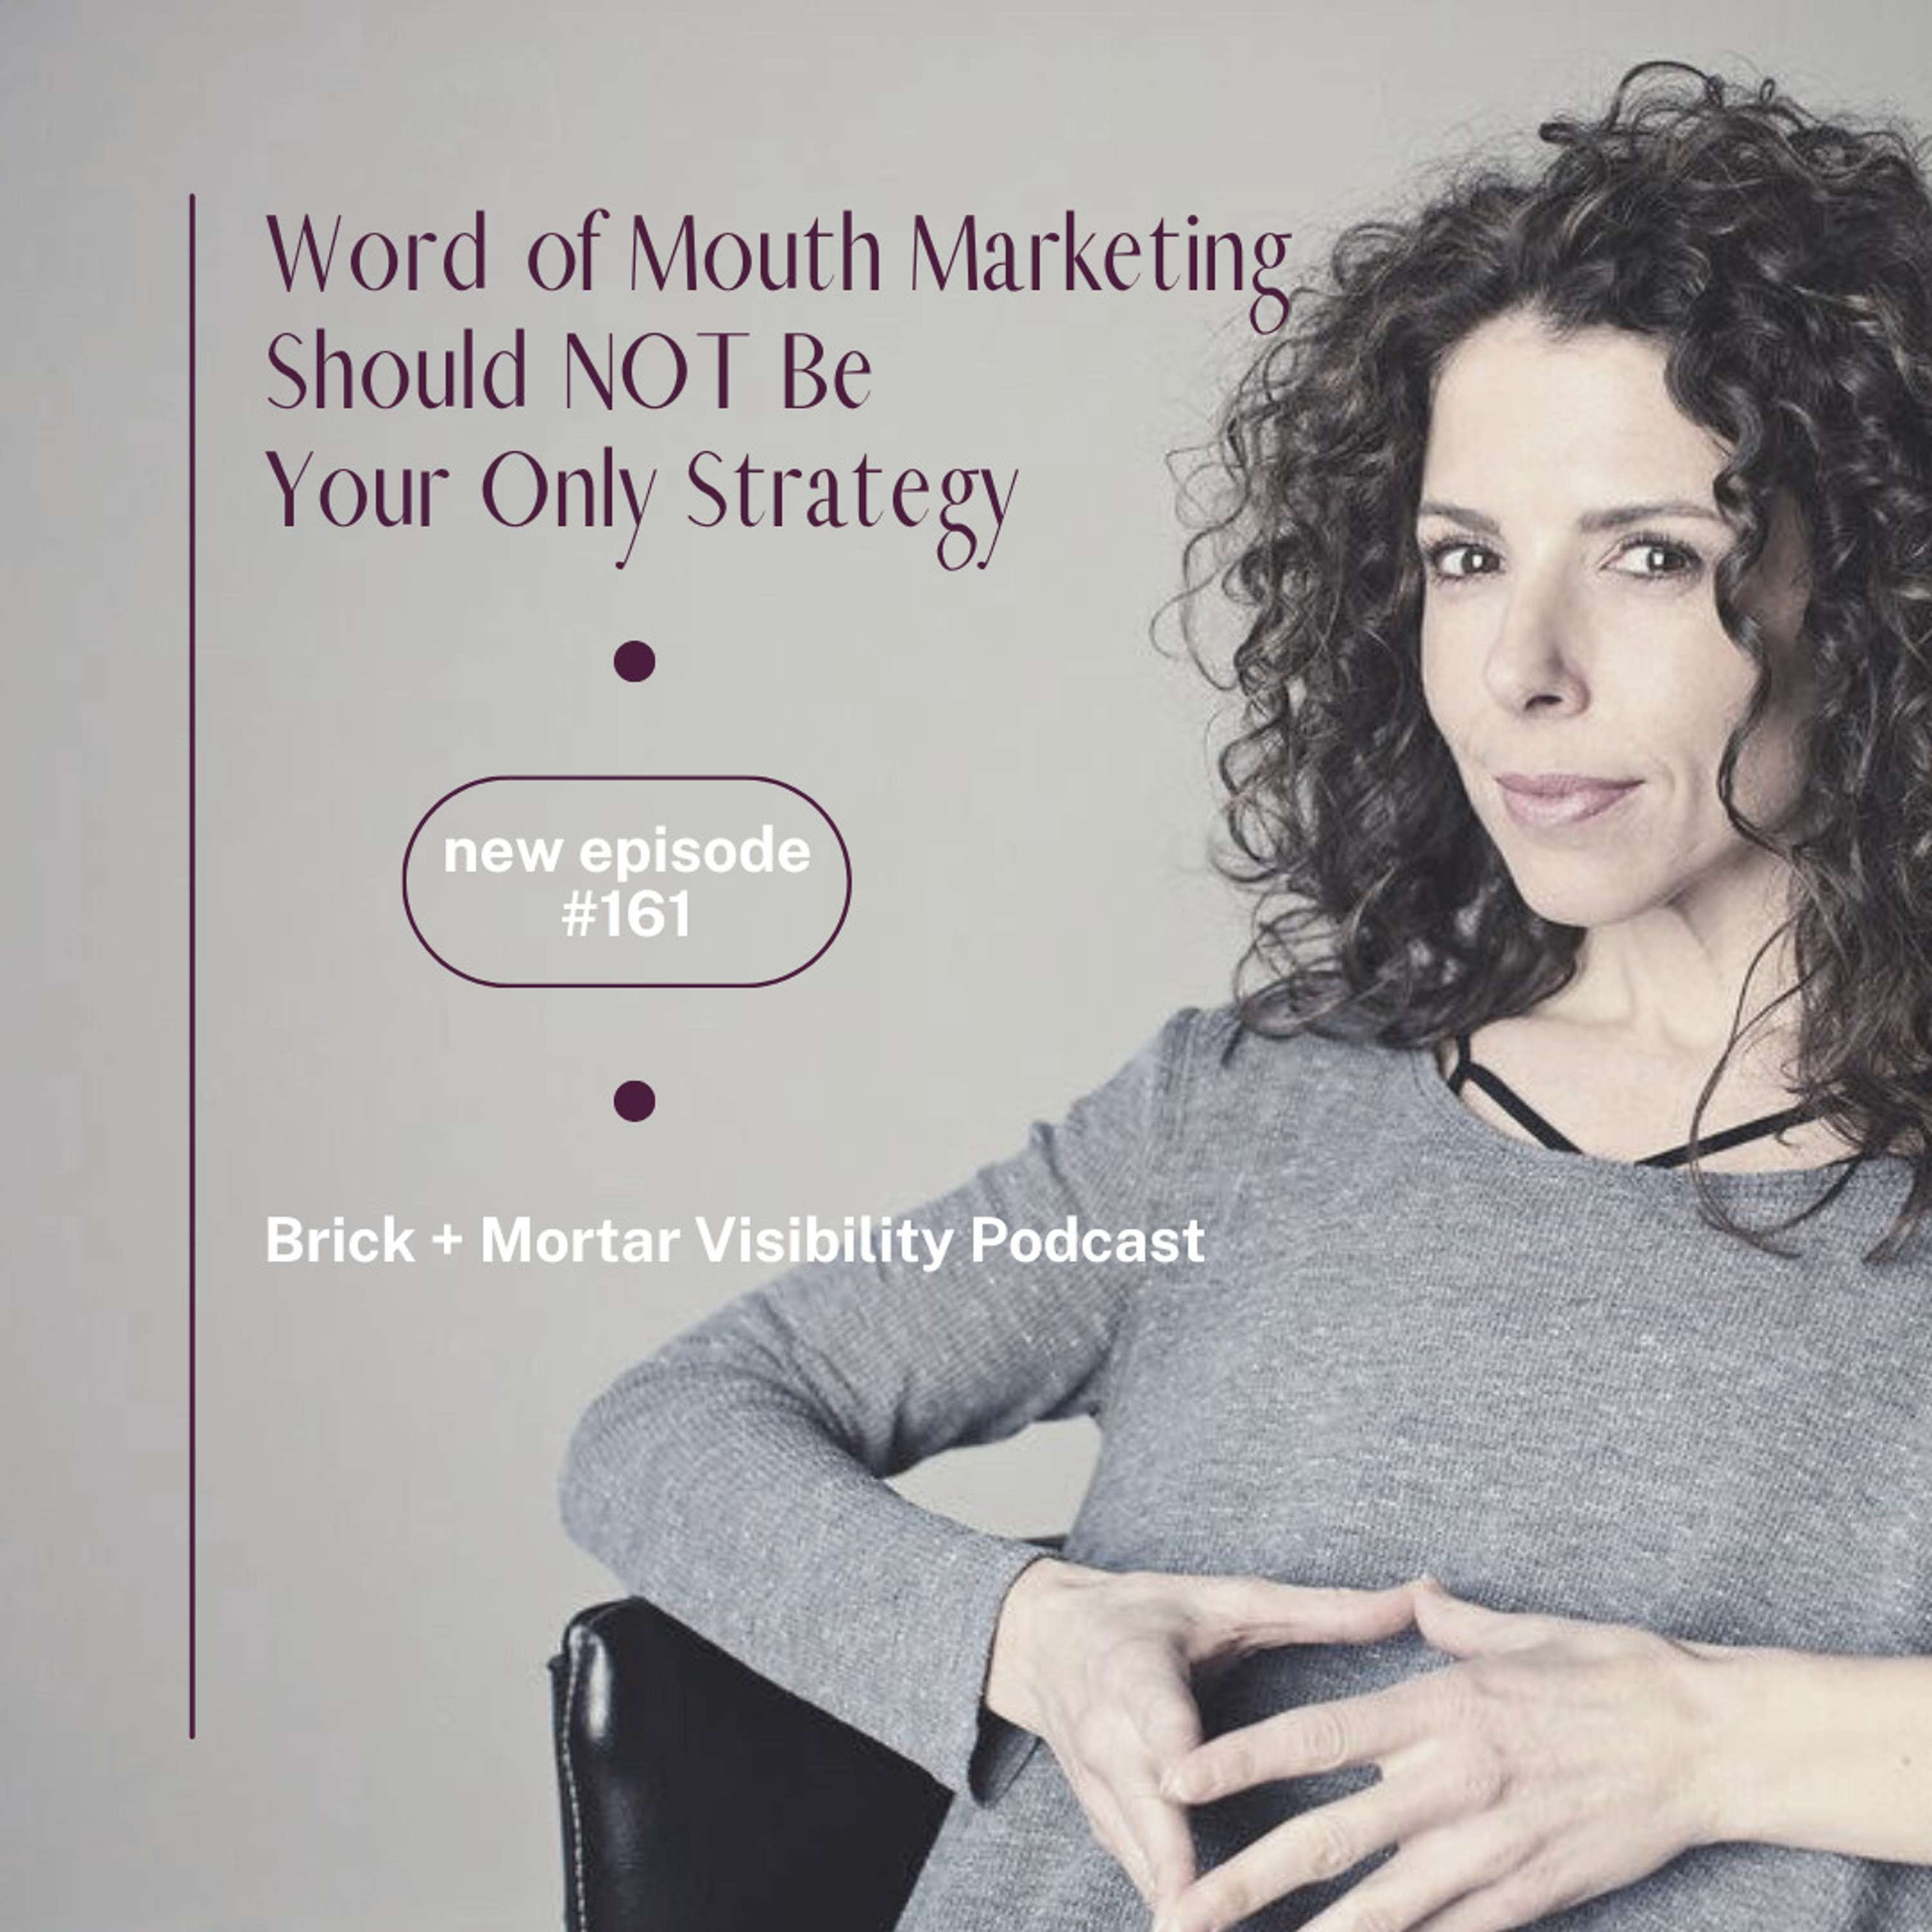 Word of Mouth Marketing Should NOT be Your Only Strategy